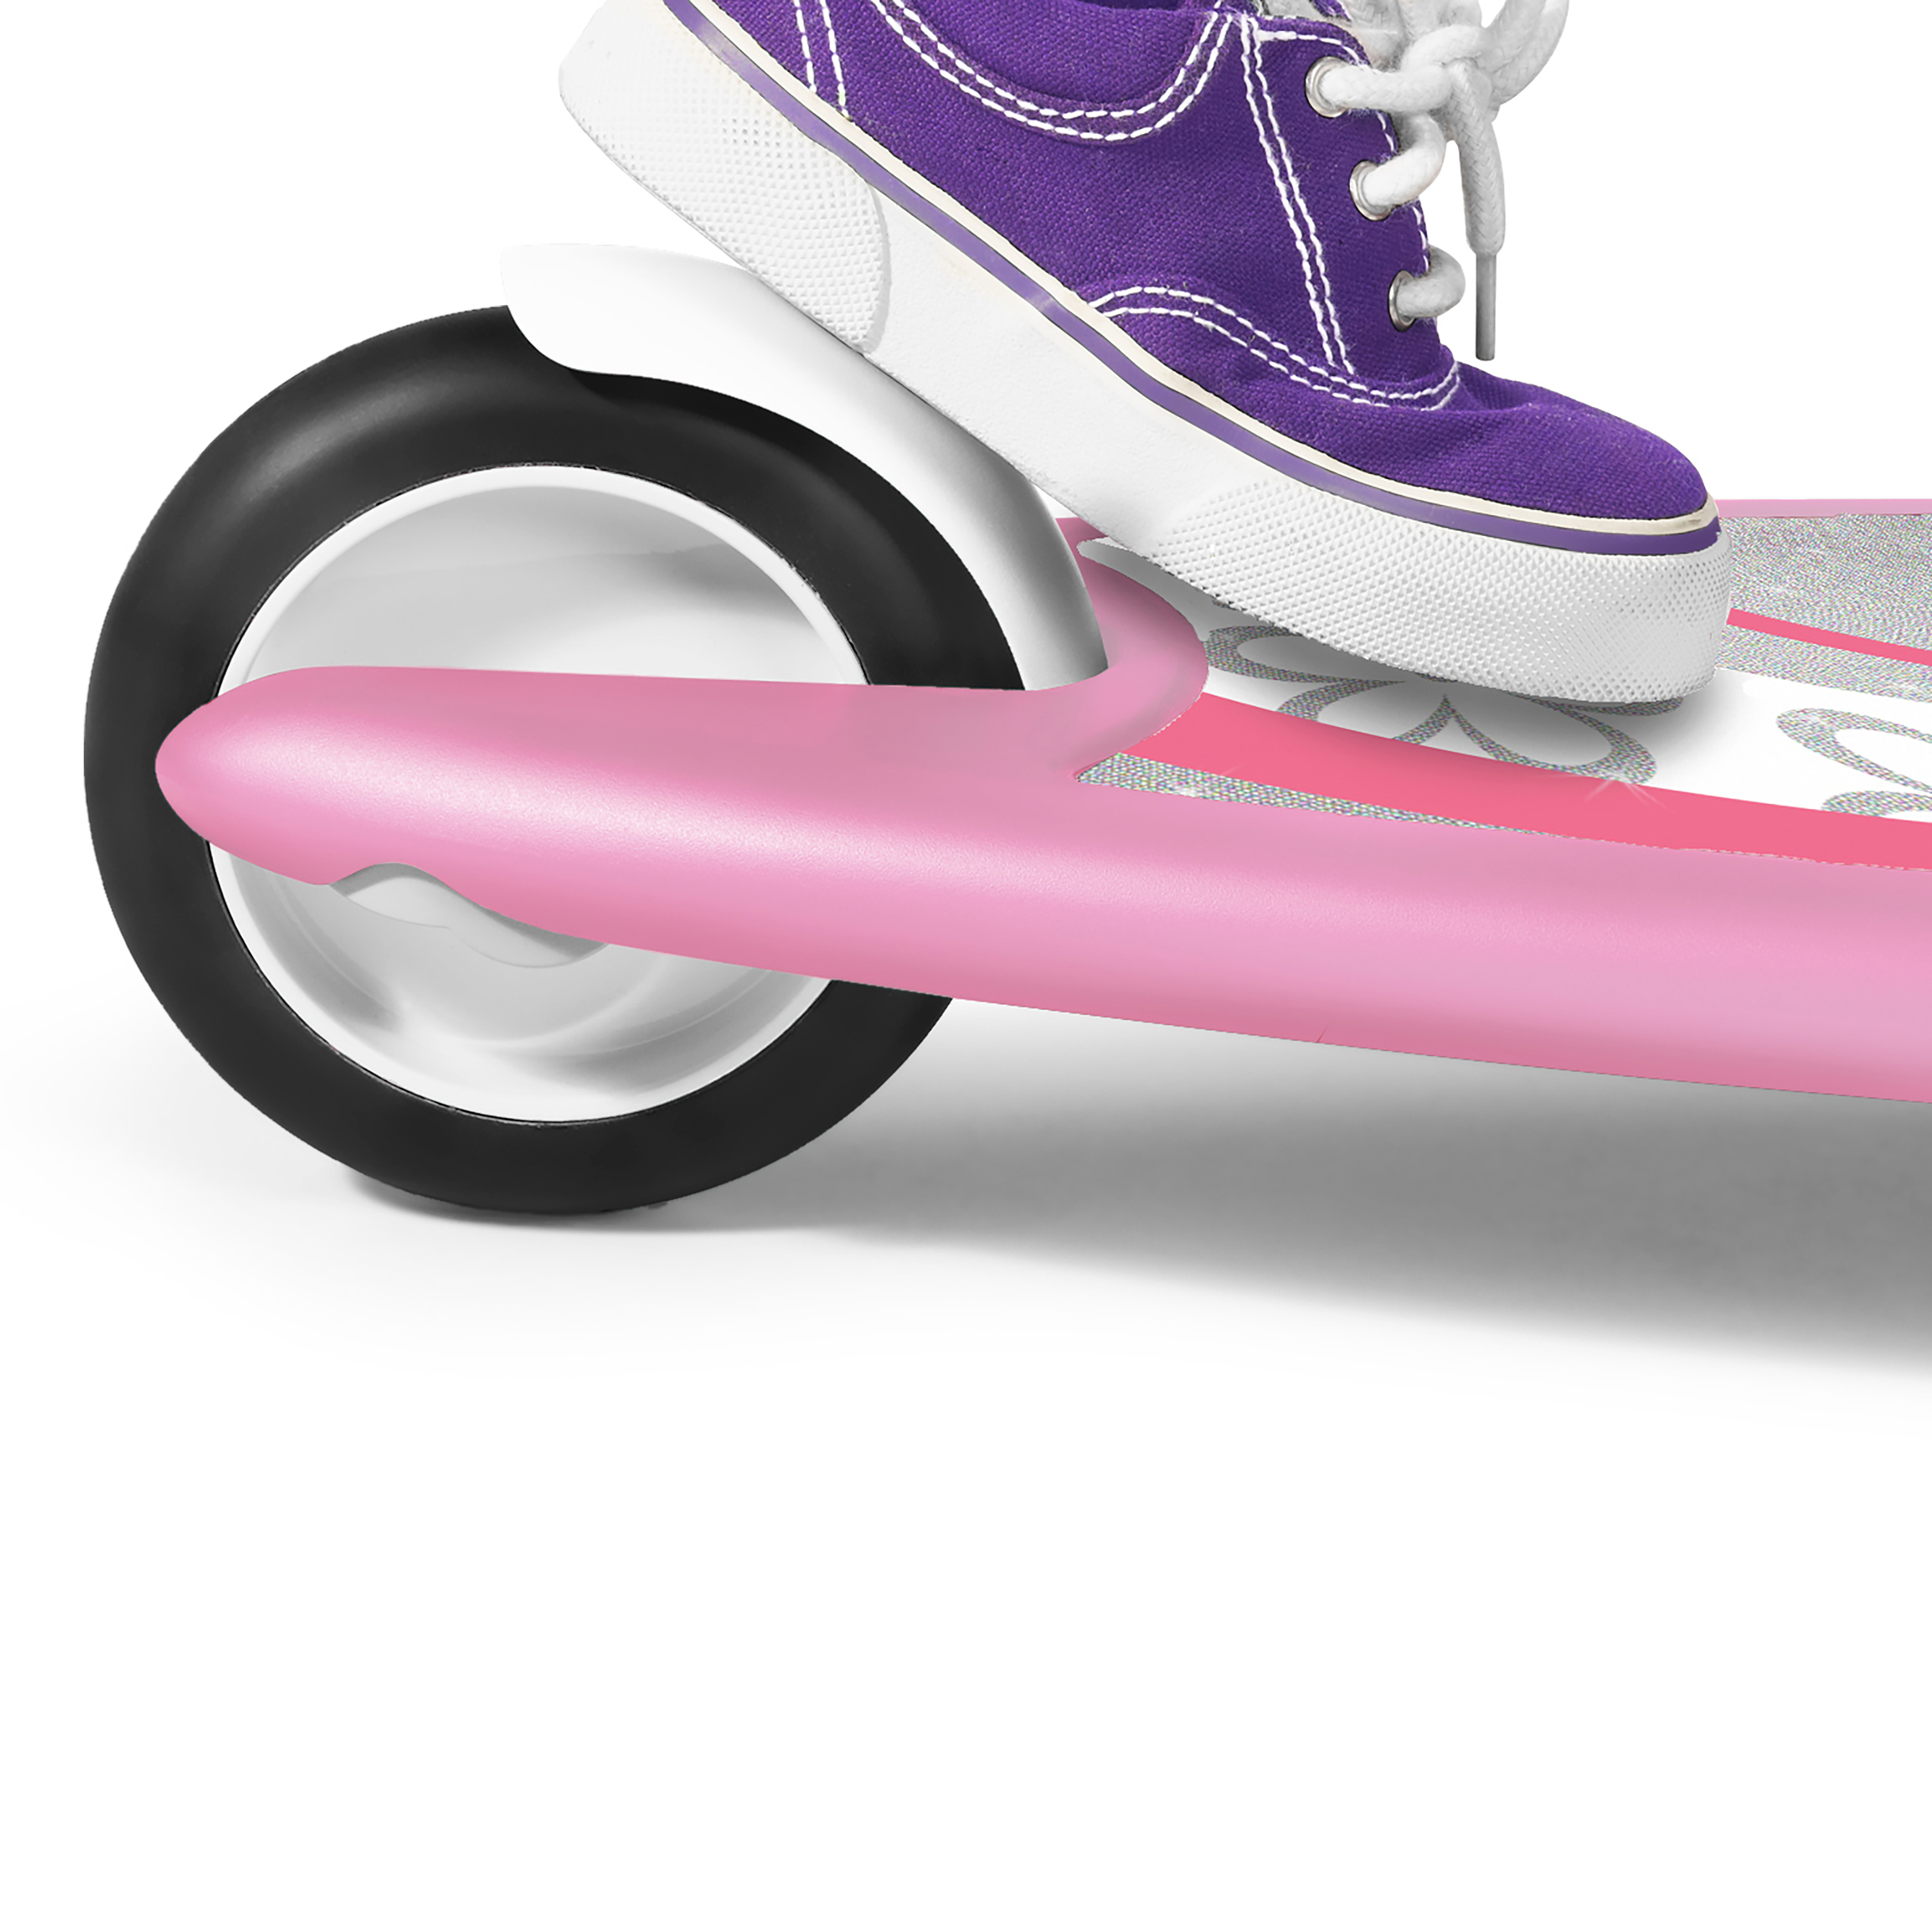 Radio Flyer, My 1st Scooter Sparkle, 3-Wheels, Pink - image 5 of 6